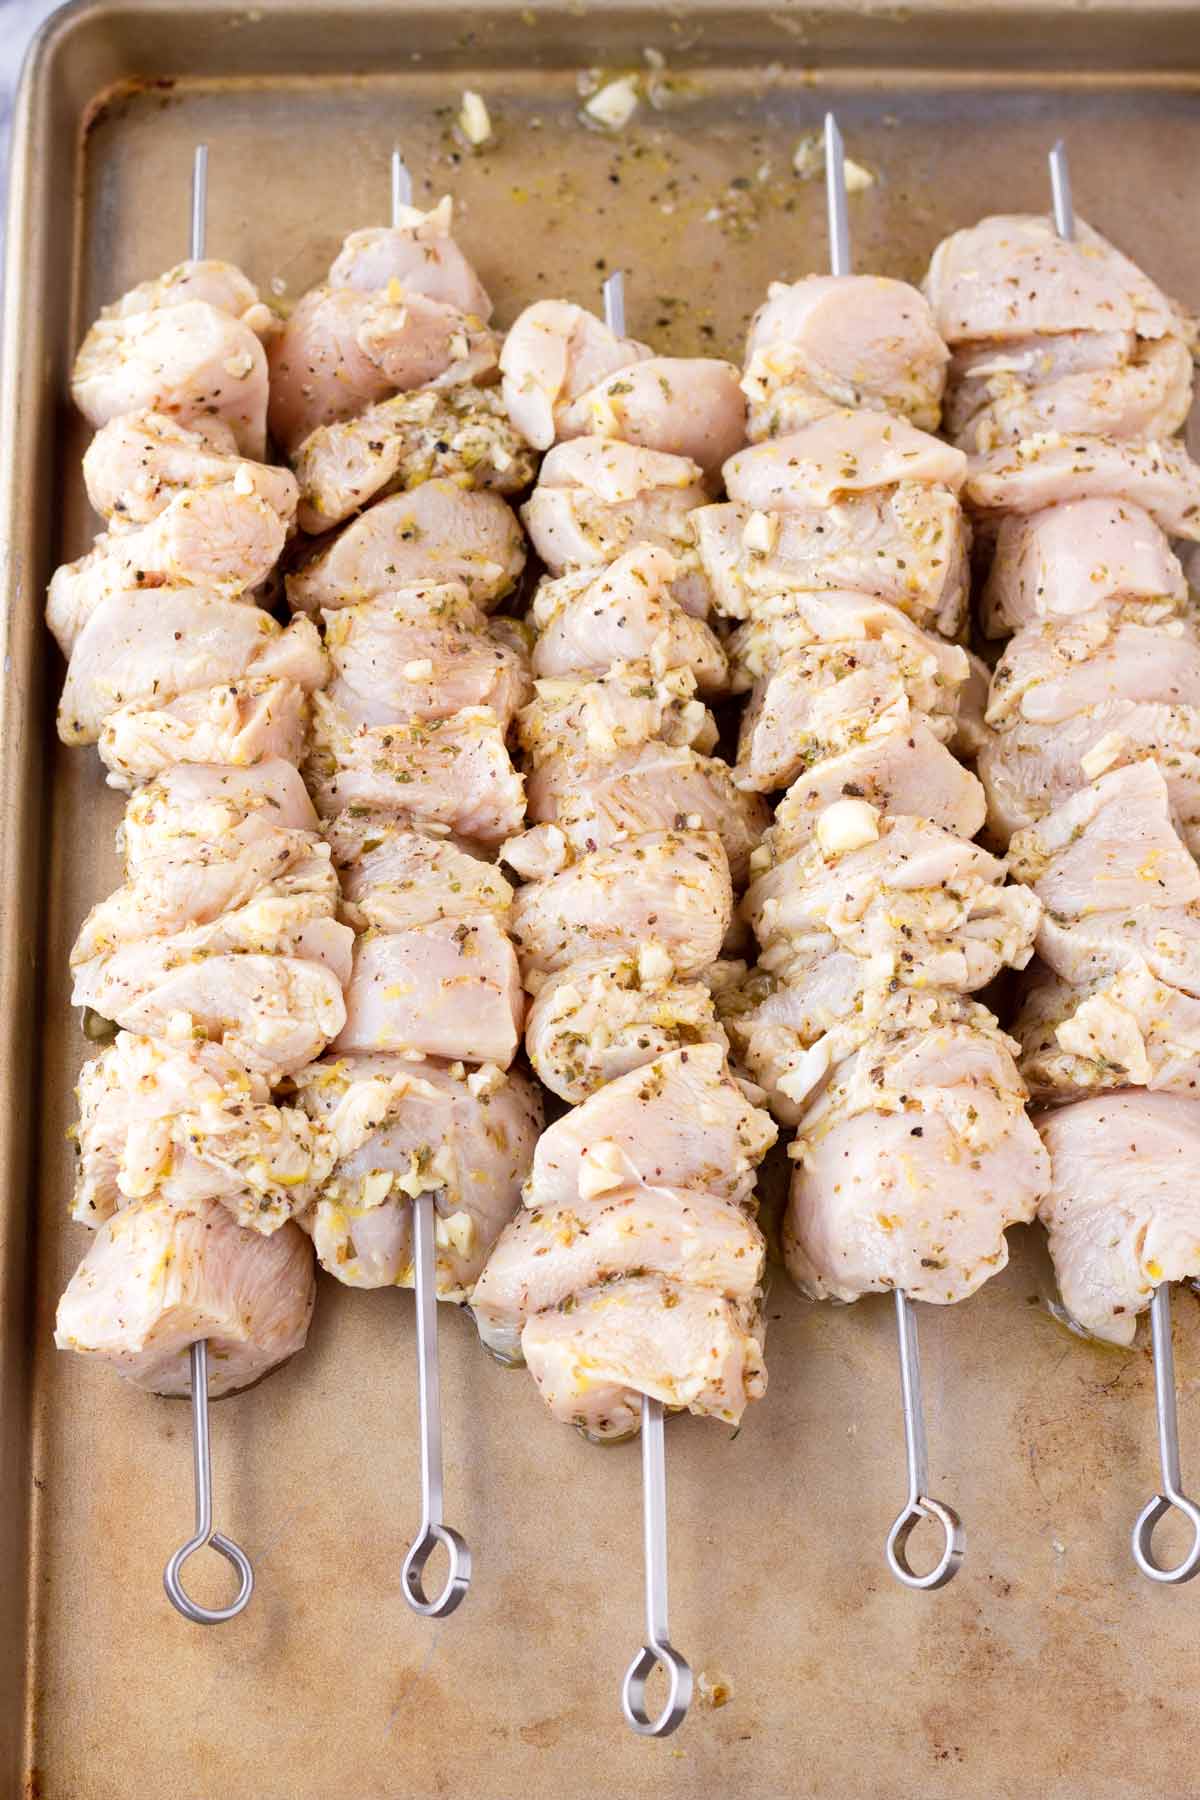 skewered chicken uncooked on a sheet pan